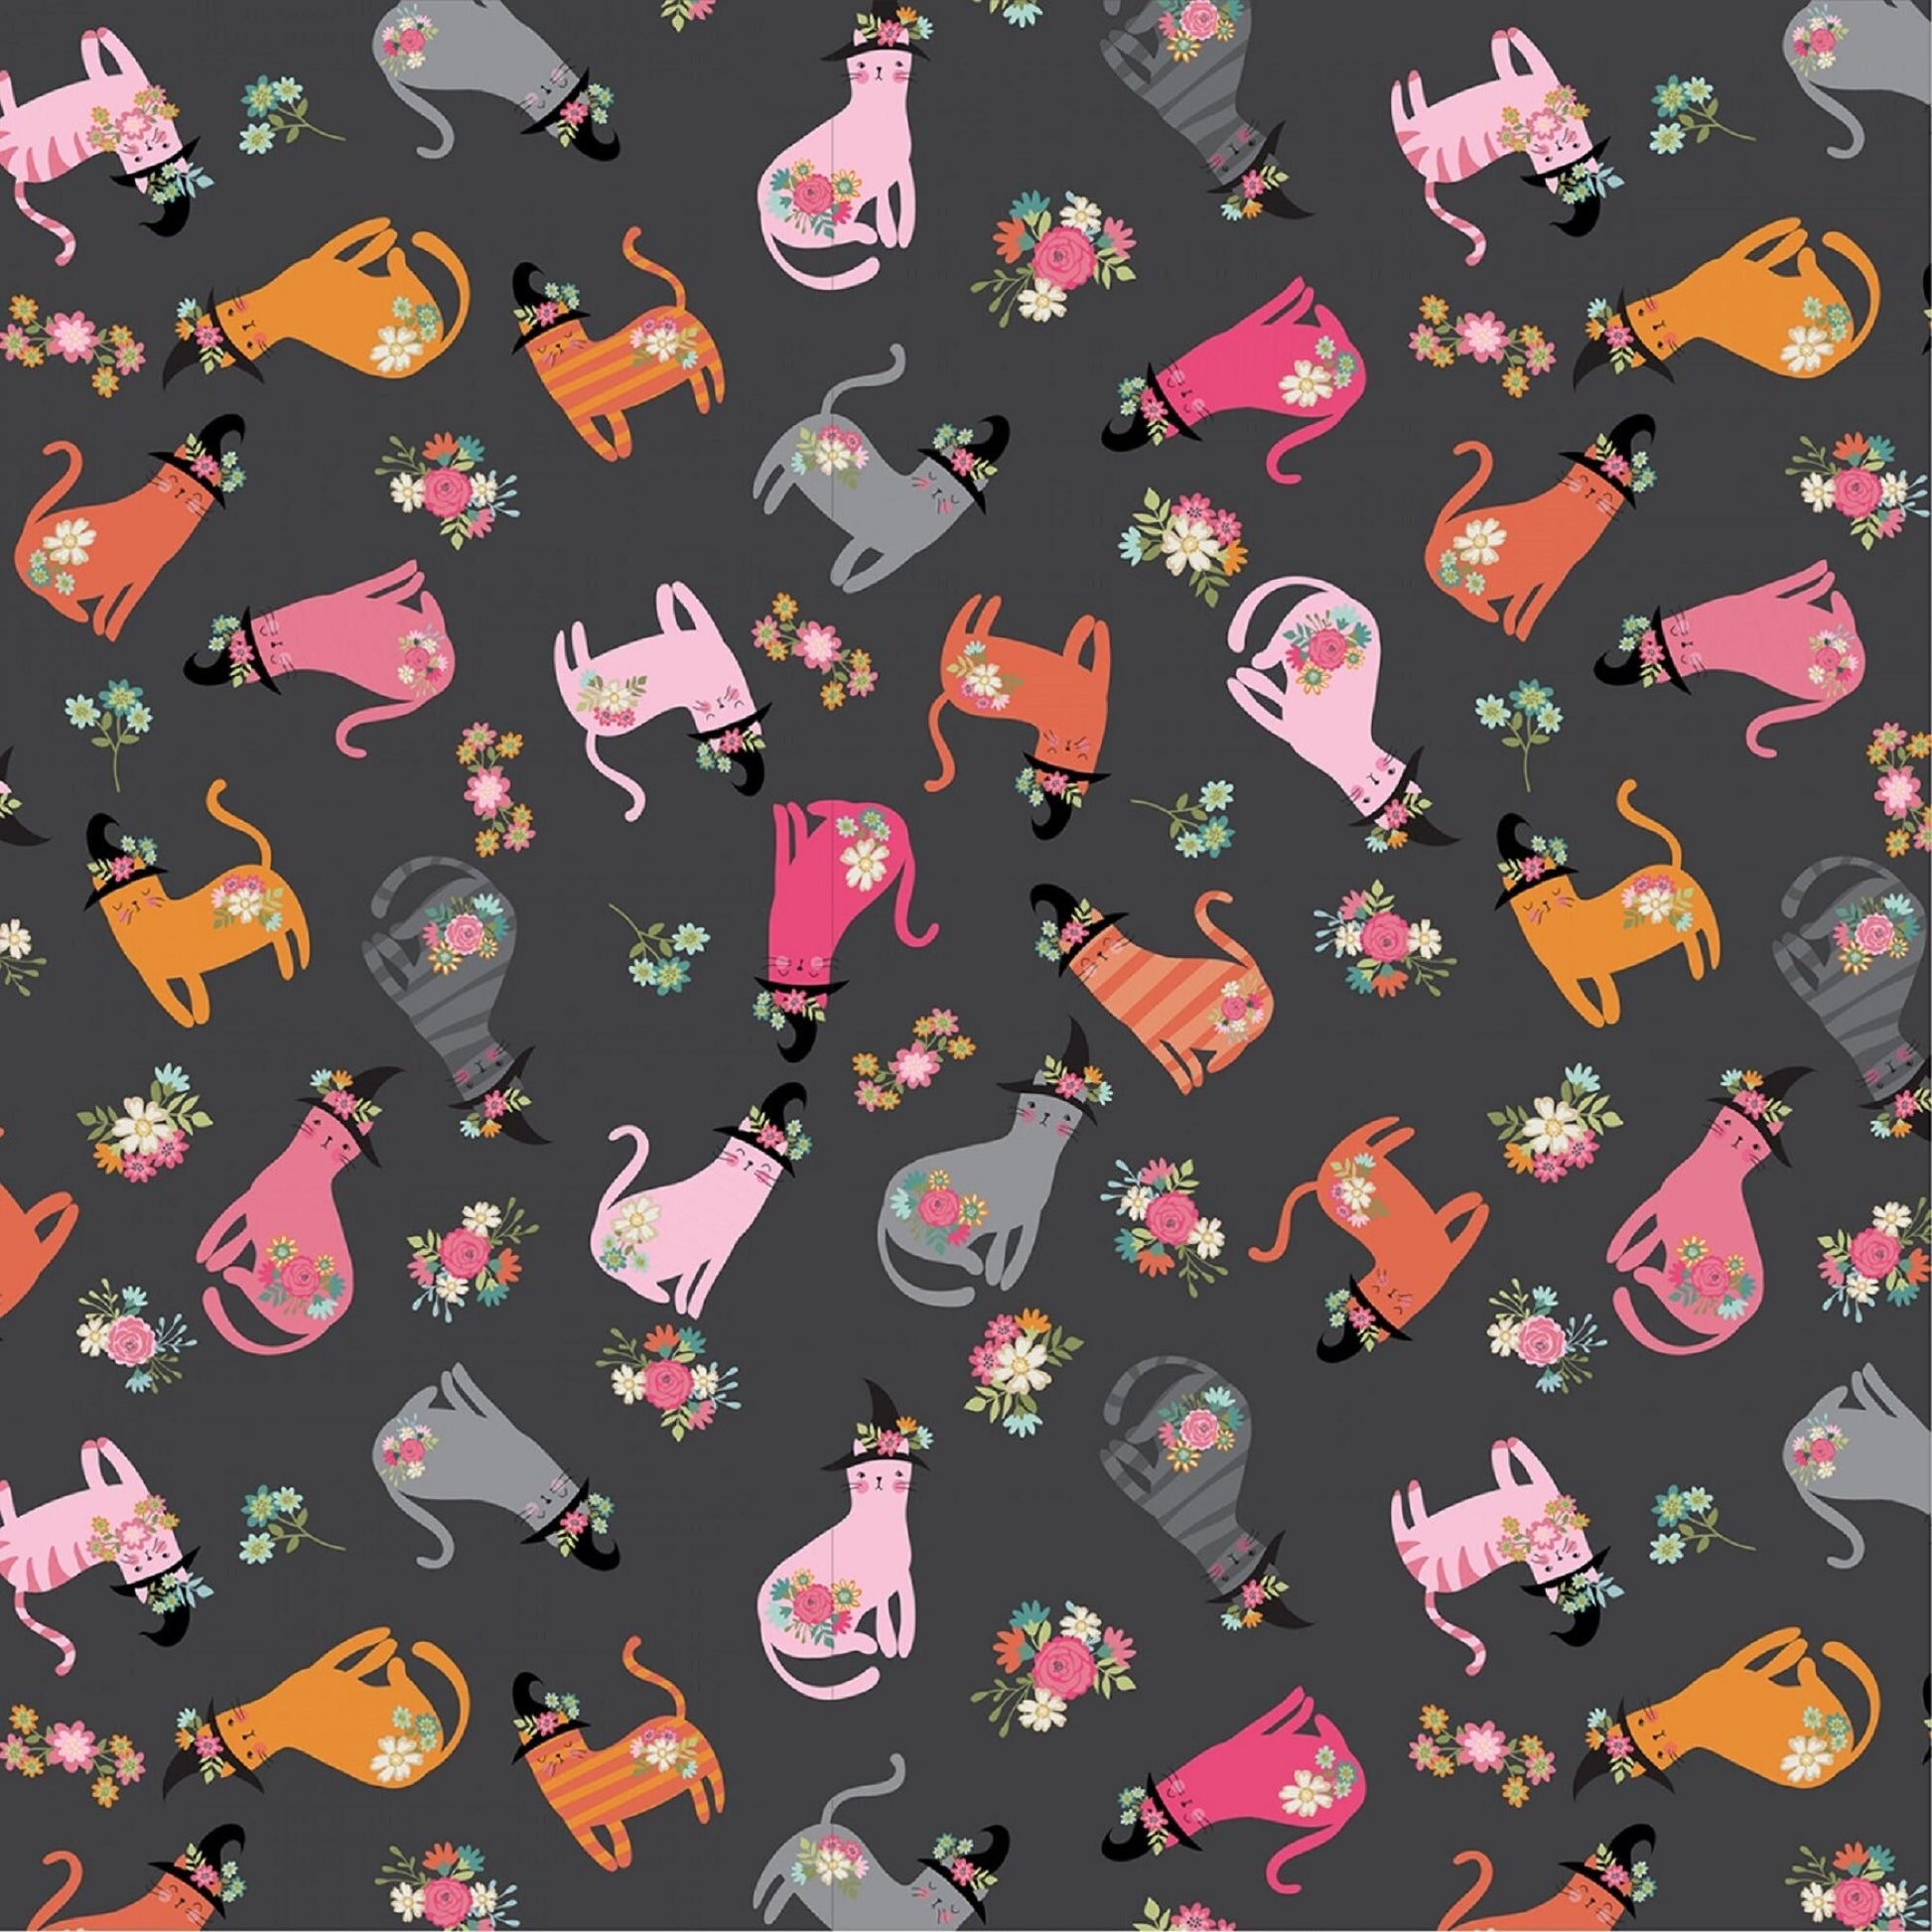 Cats in Hats Black Kitty Loves Candy Lori Woods Poppie Cotton Fabric 100% Quilters Cotton Fabric Fetish